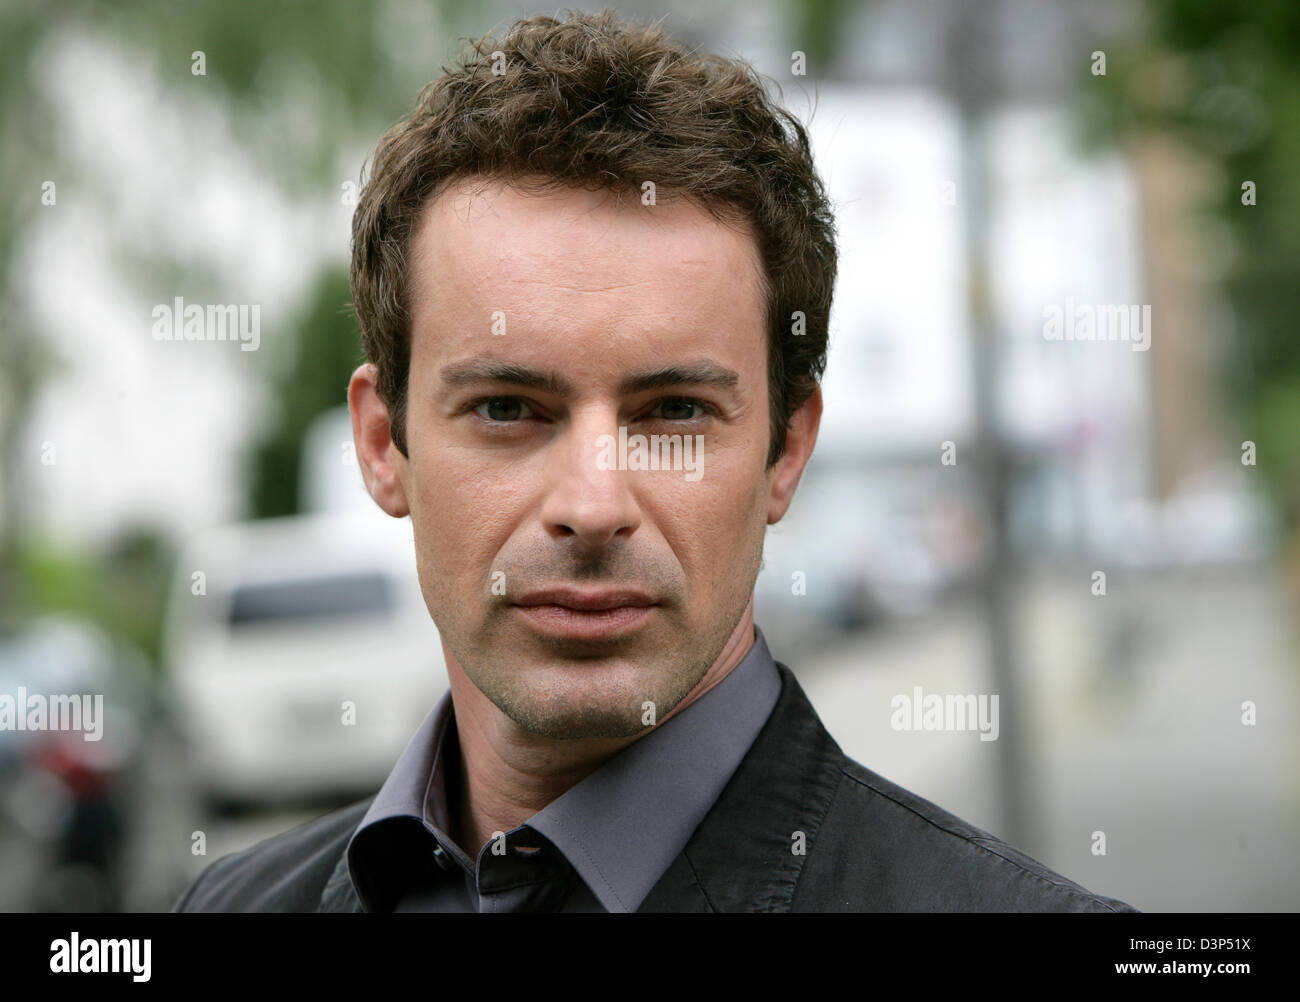 The photo shows the German actor Gedeon Burkhard ('Little Sharks', 'A Cop's Best Friend') in Cologne, Germany, Thursday, 31 August 2006. He was pictured at the shooting of new sequels for the RTL TV-action series 'Alarm für Security 13' in Cologne. Photo: Rolf Vennenbernd Stock Photo